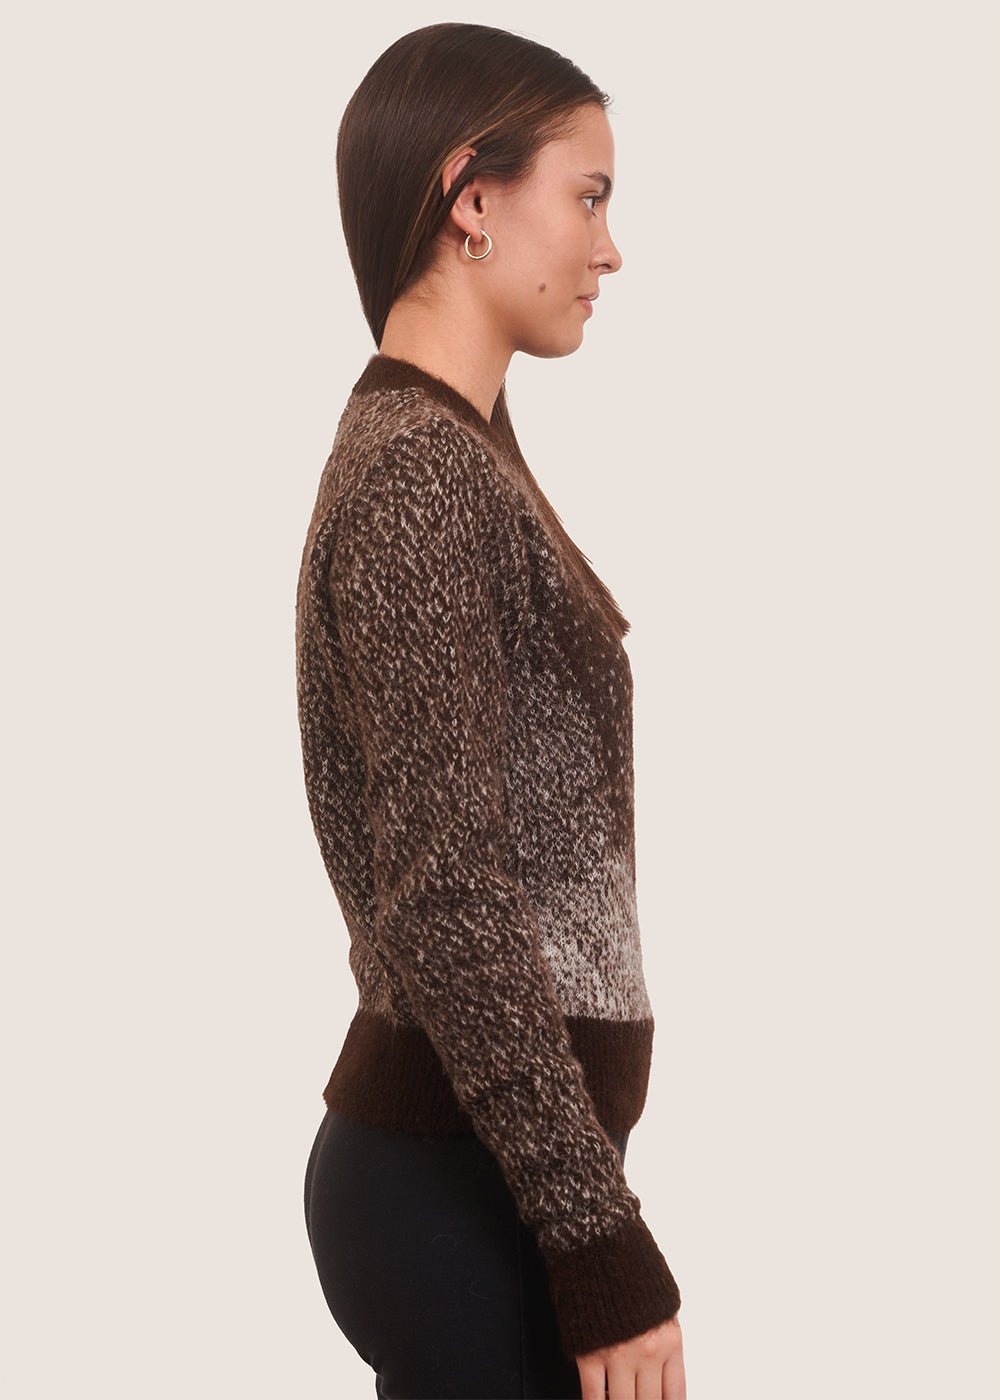 Paloma Wool Dark Brown Paufito Sweater - New Classics Studios Sustainable Ethical Fashion Canada